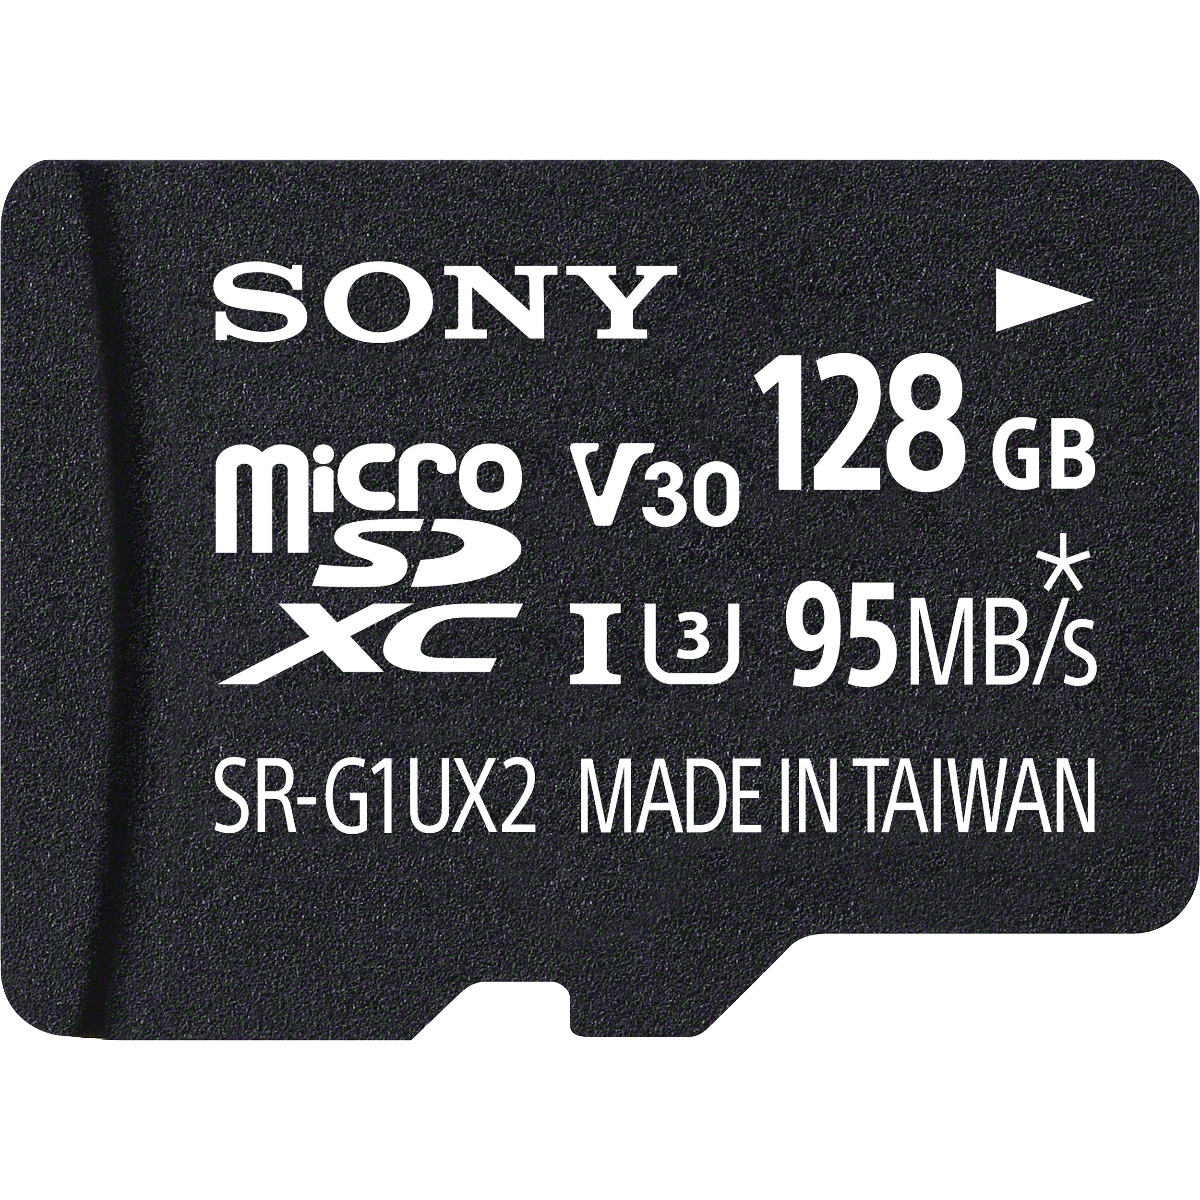 Sony 128GB High Speed Class 10 UHS-1 Micro SDXC up to 95MB/s Memory Card (SR-G1UX2A/TQ)